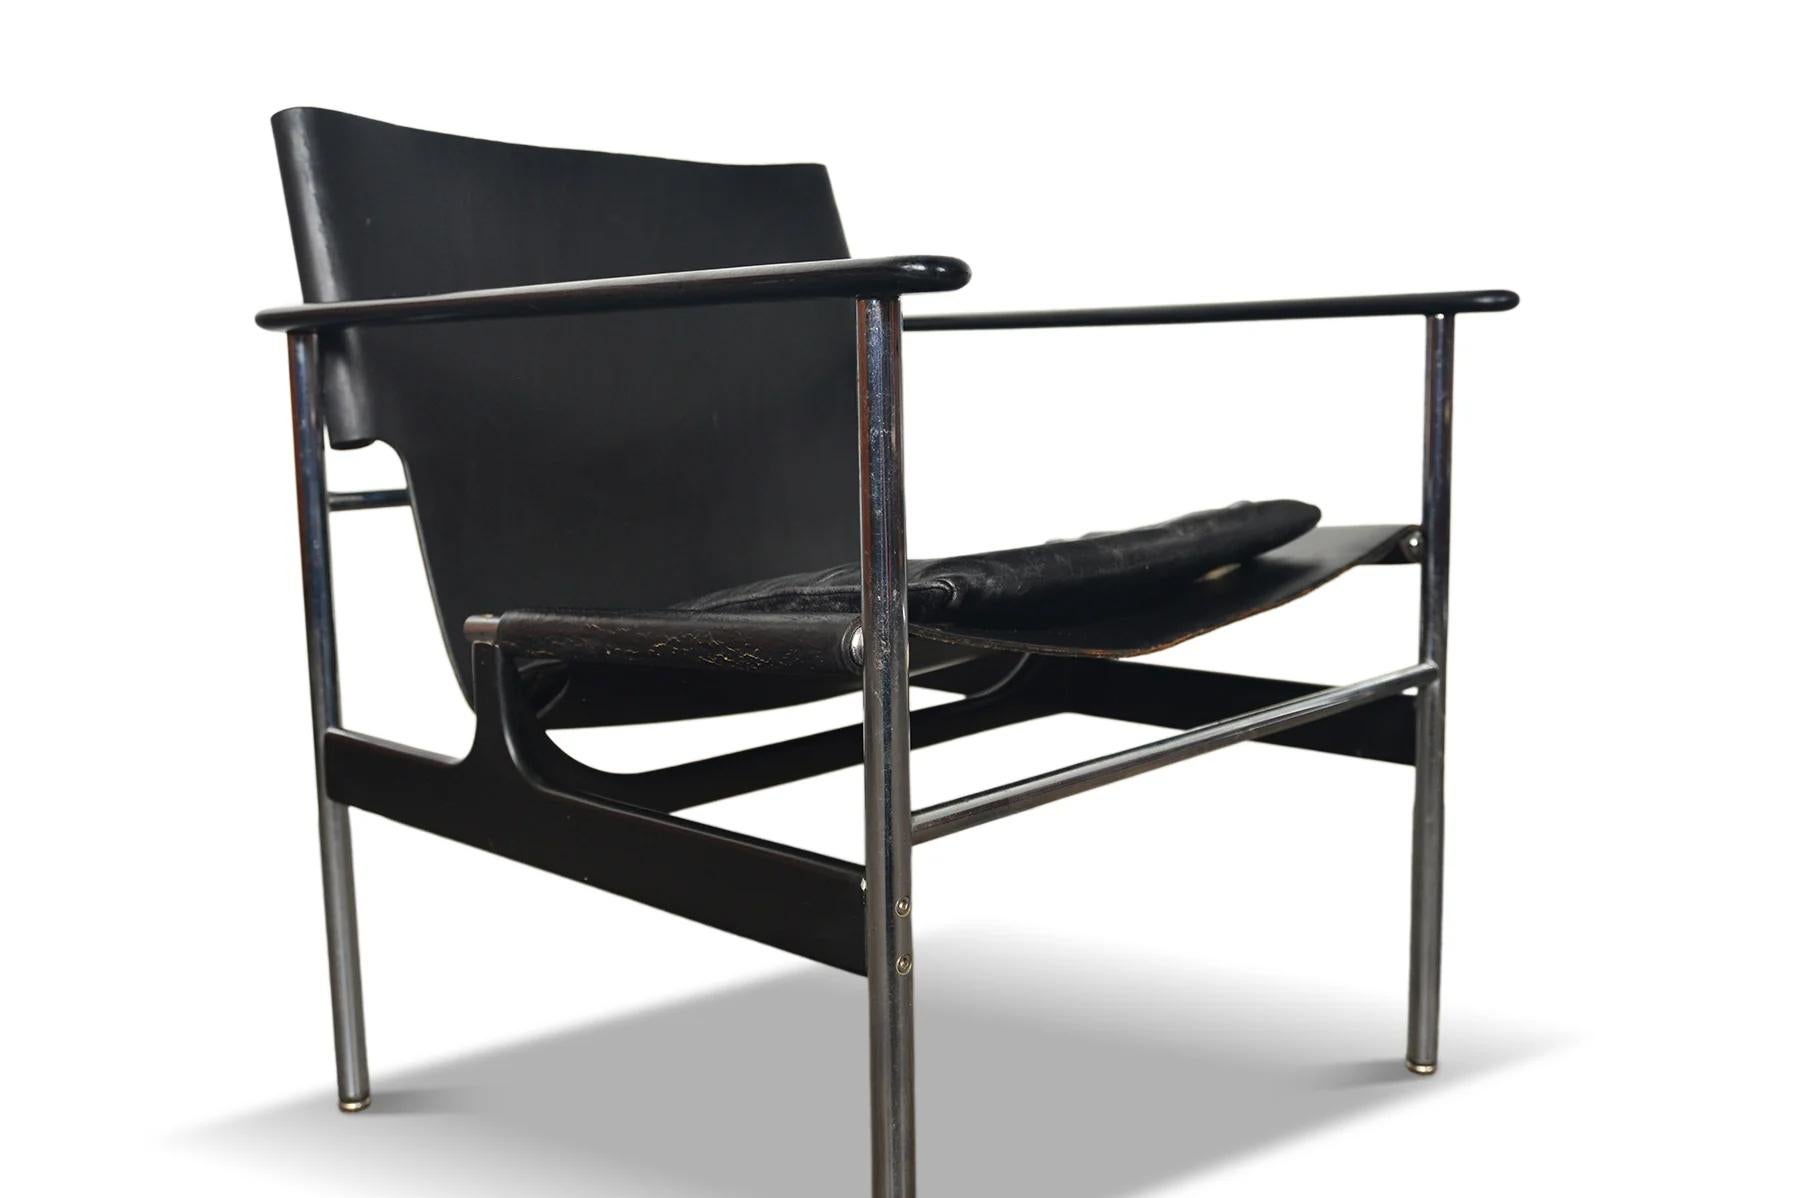 Origin: USA
Designer: Charles Pollock
Manufacturer: Knoll
Era: 1960s
Dimensions: 24.5″ wide x 26″ deep x 28″ tall
Seat: 17.5″ tall

Condition: In great original condition with typical wear for their vintage.  Some crazing on leather, as expected for